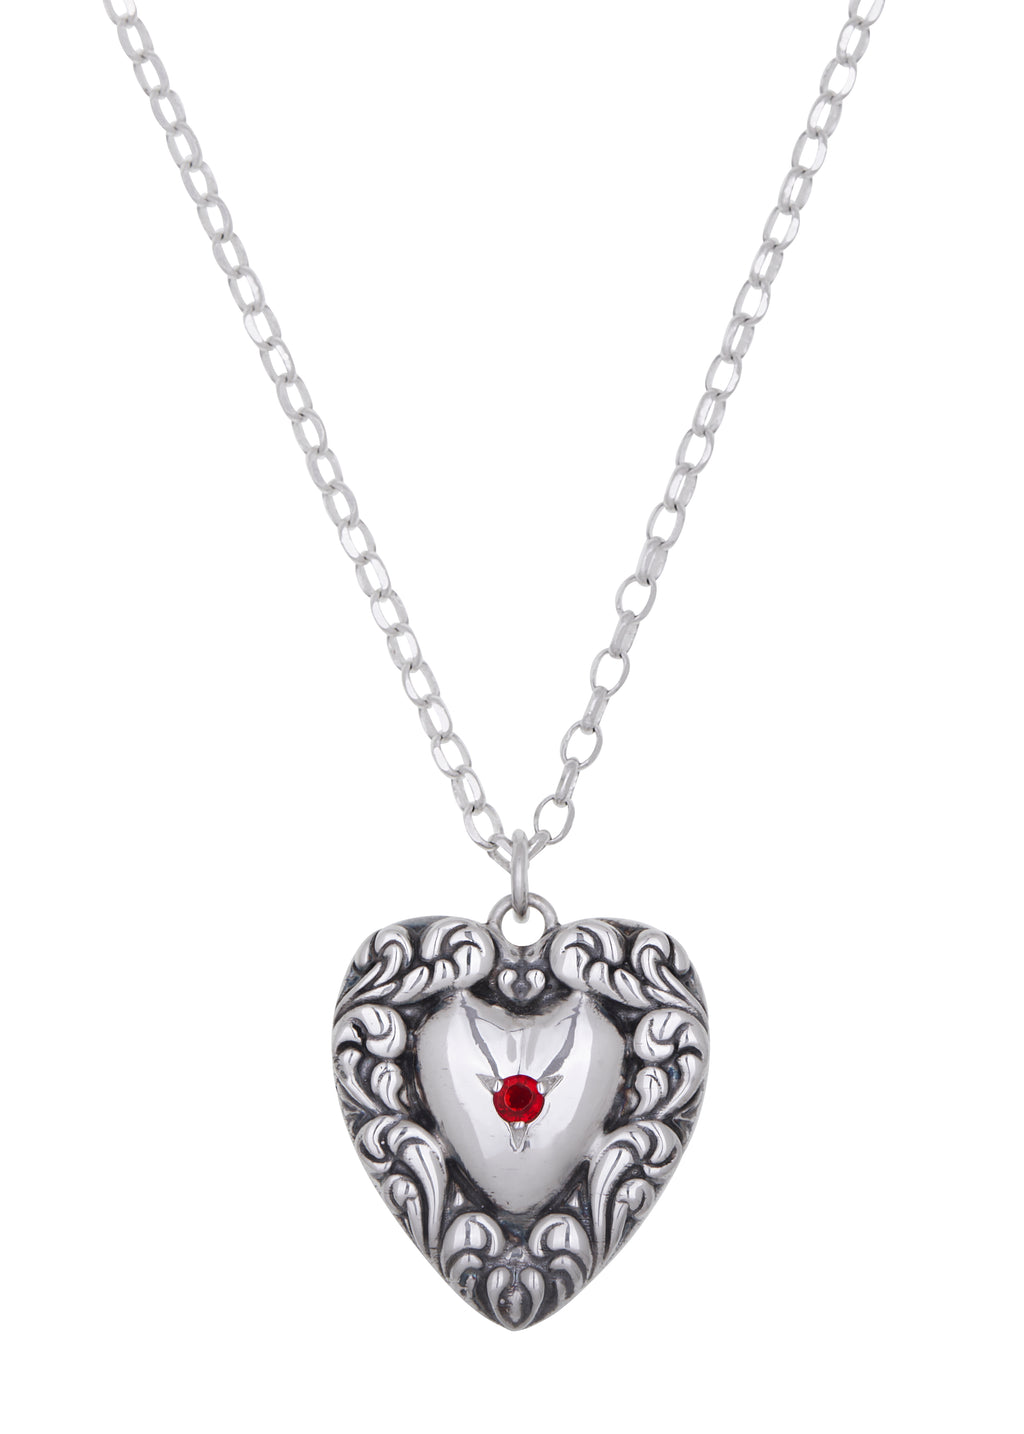 Dorian Ruby Necklace in Sterling Silver